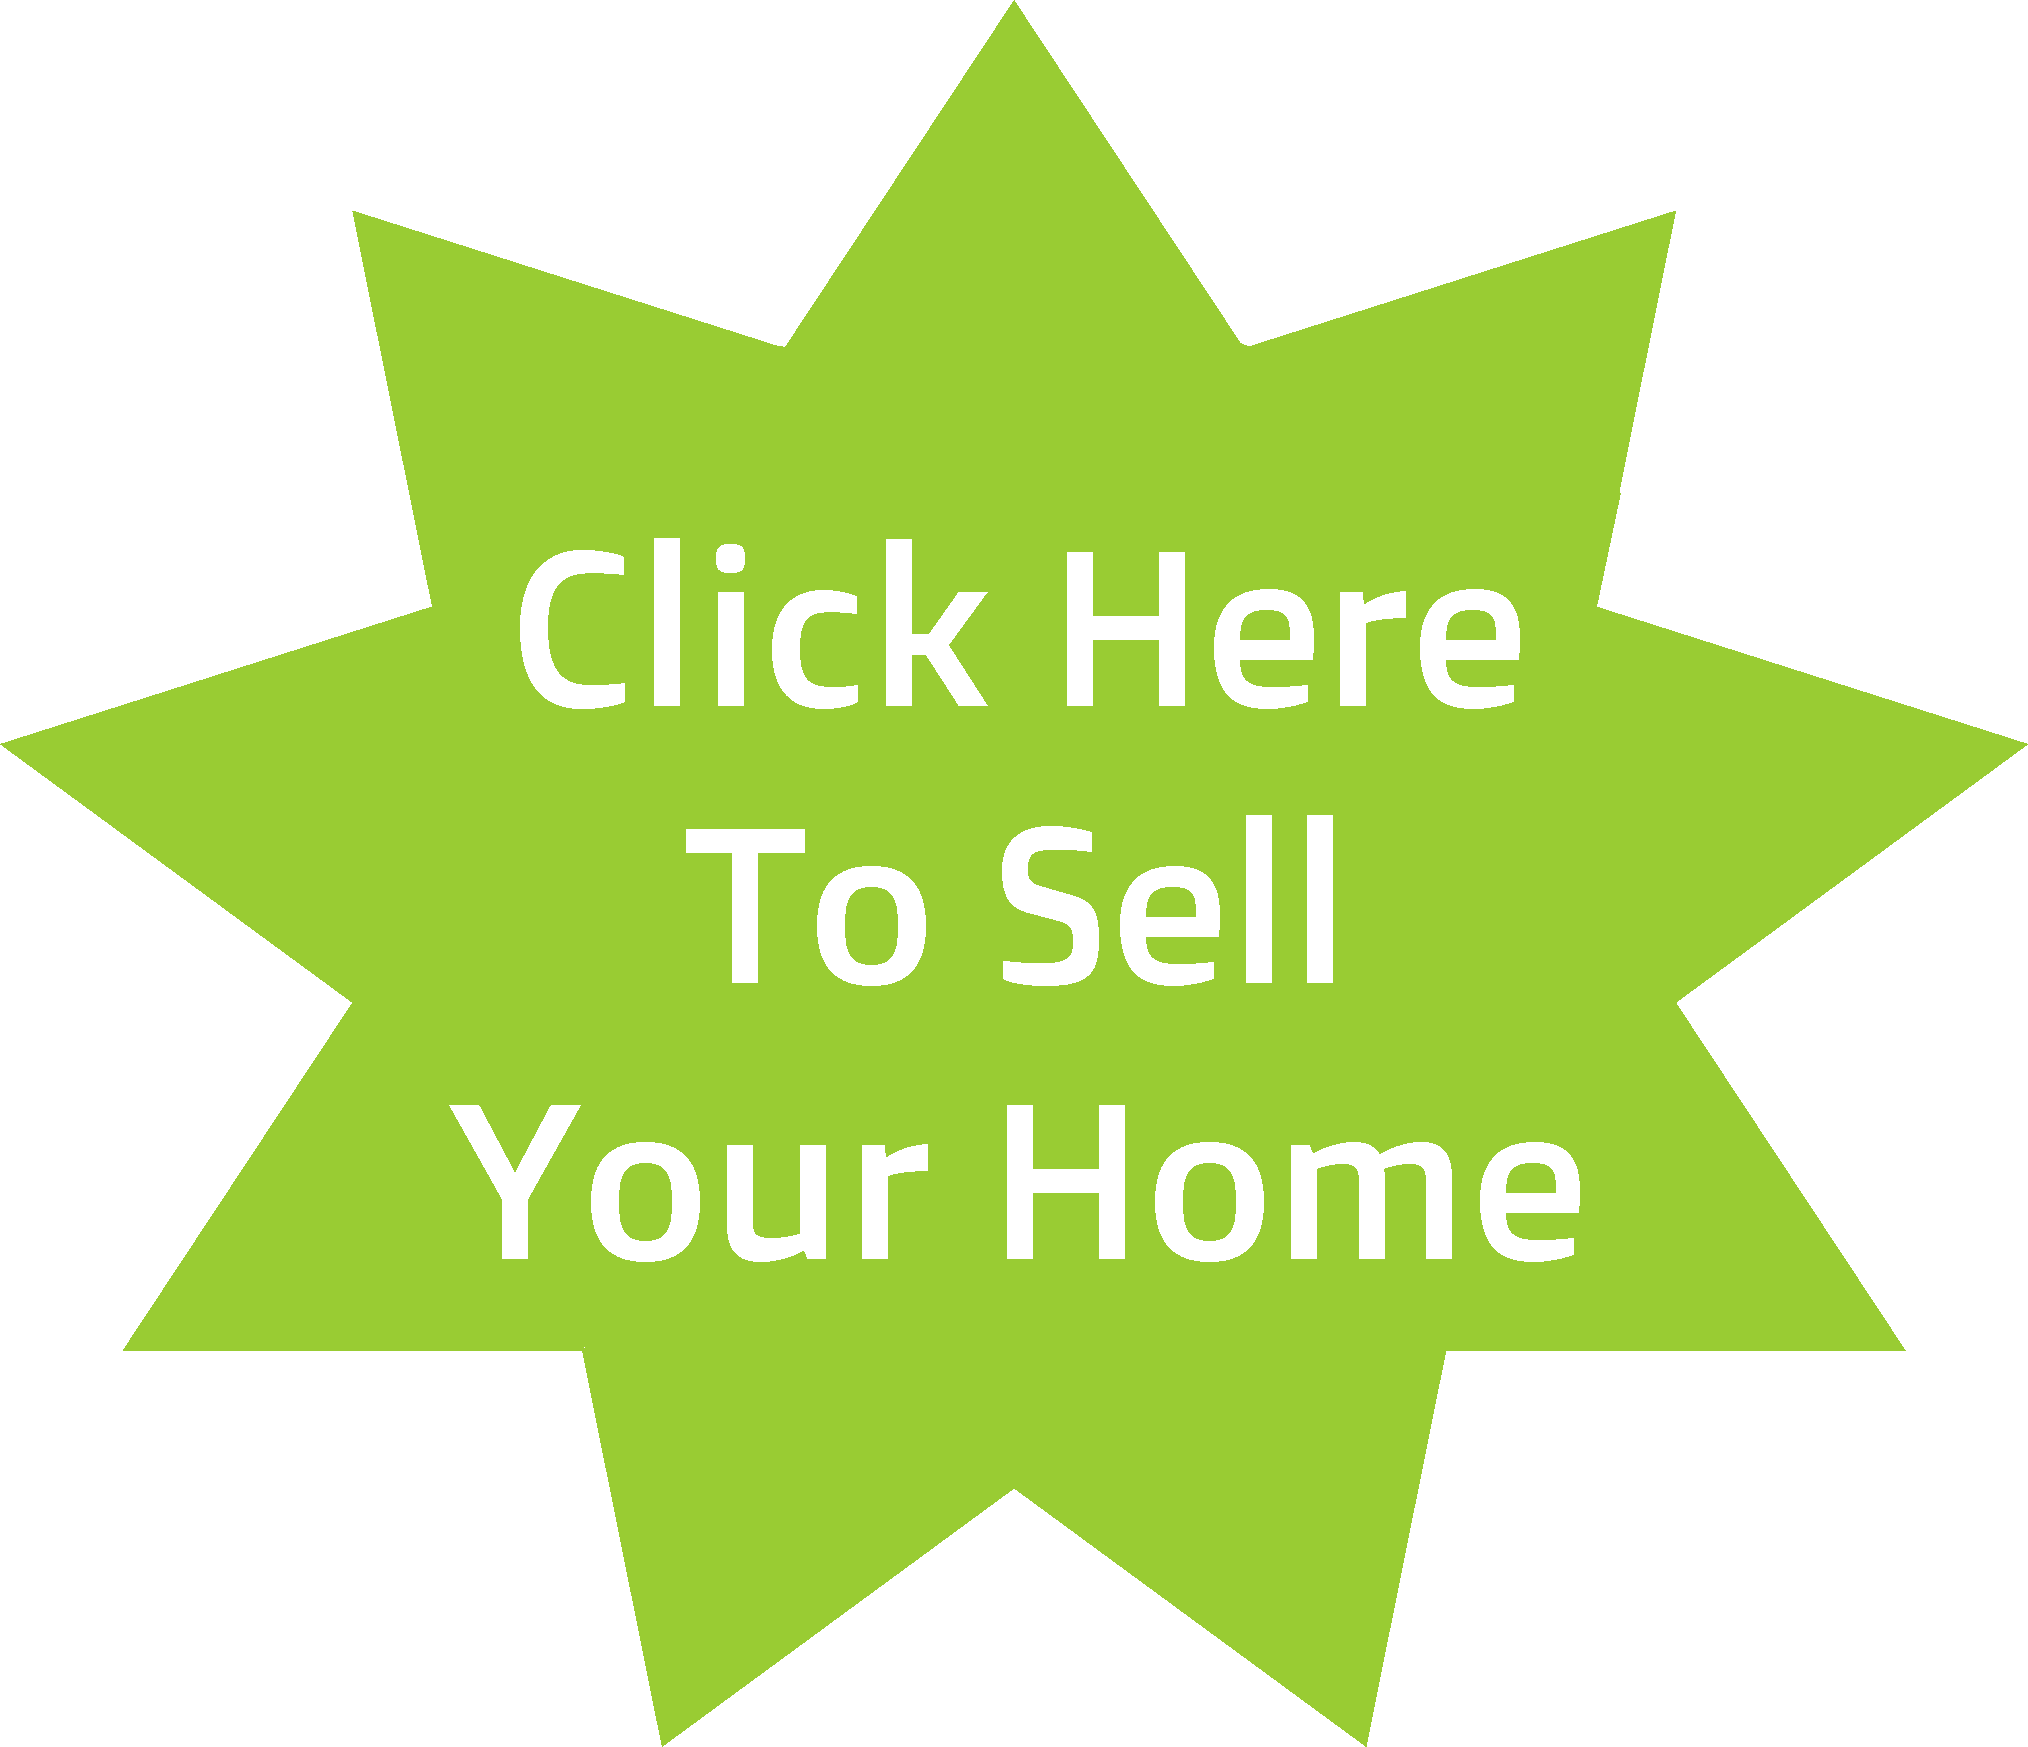 Click here to sell your home